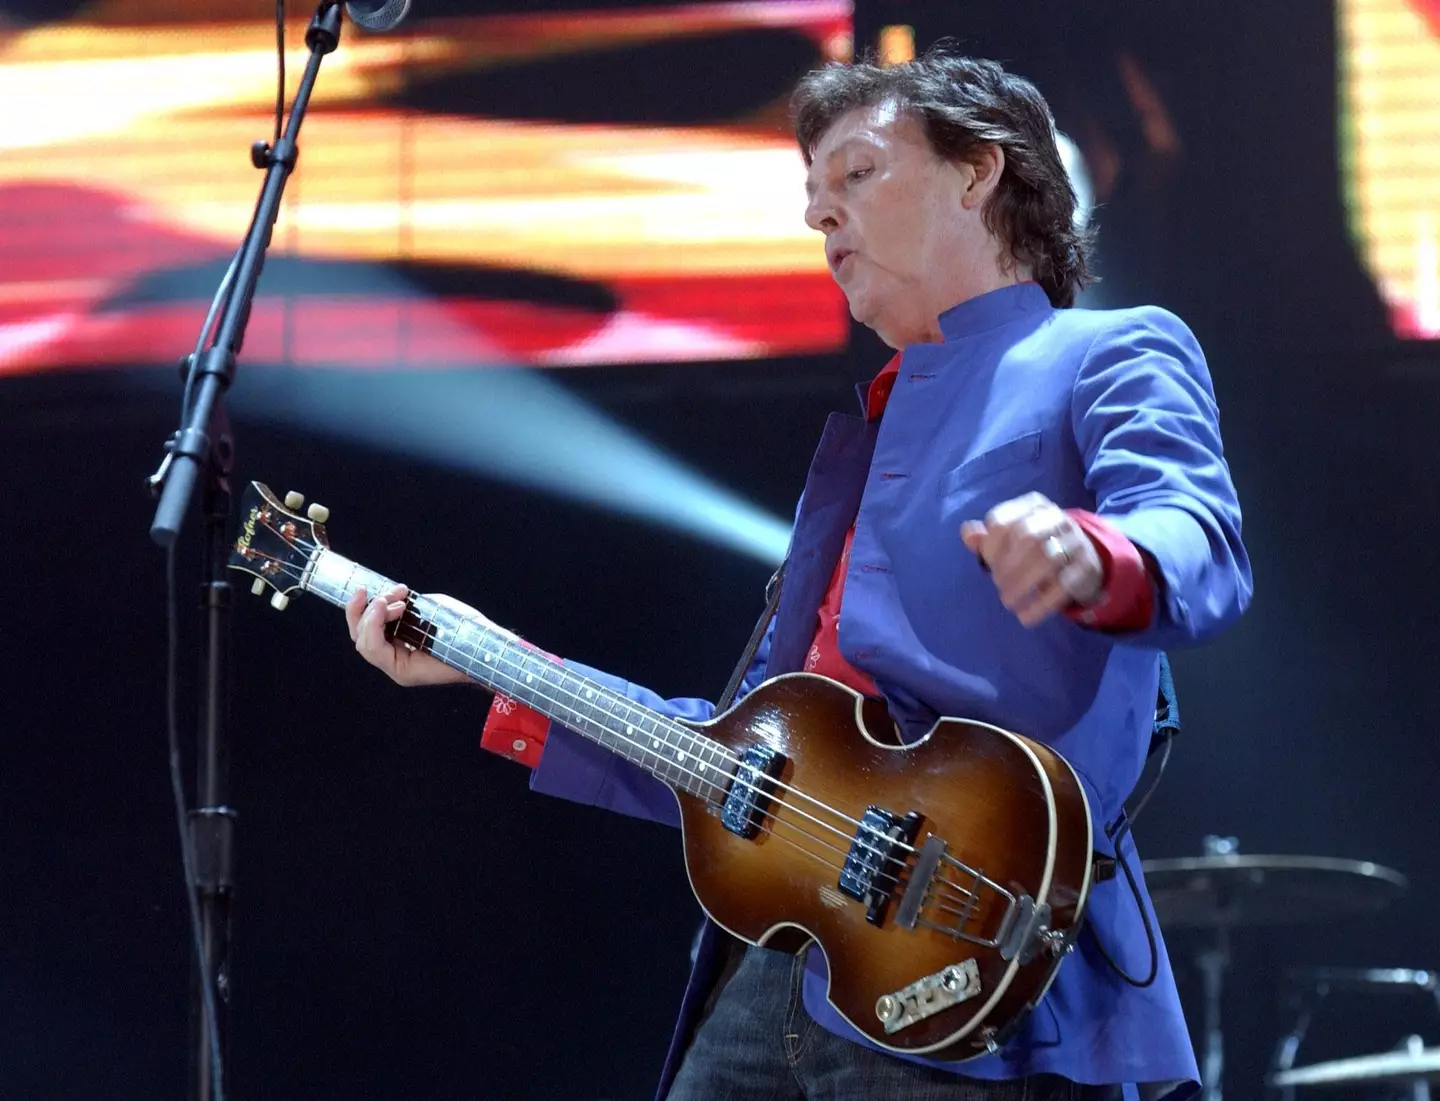 McCartney previously headlined in 2004.